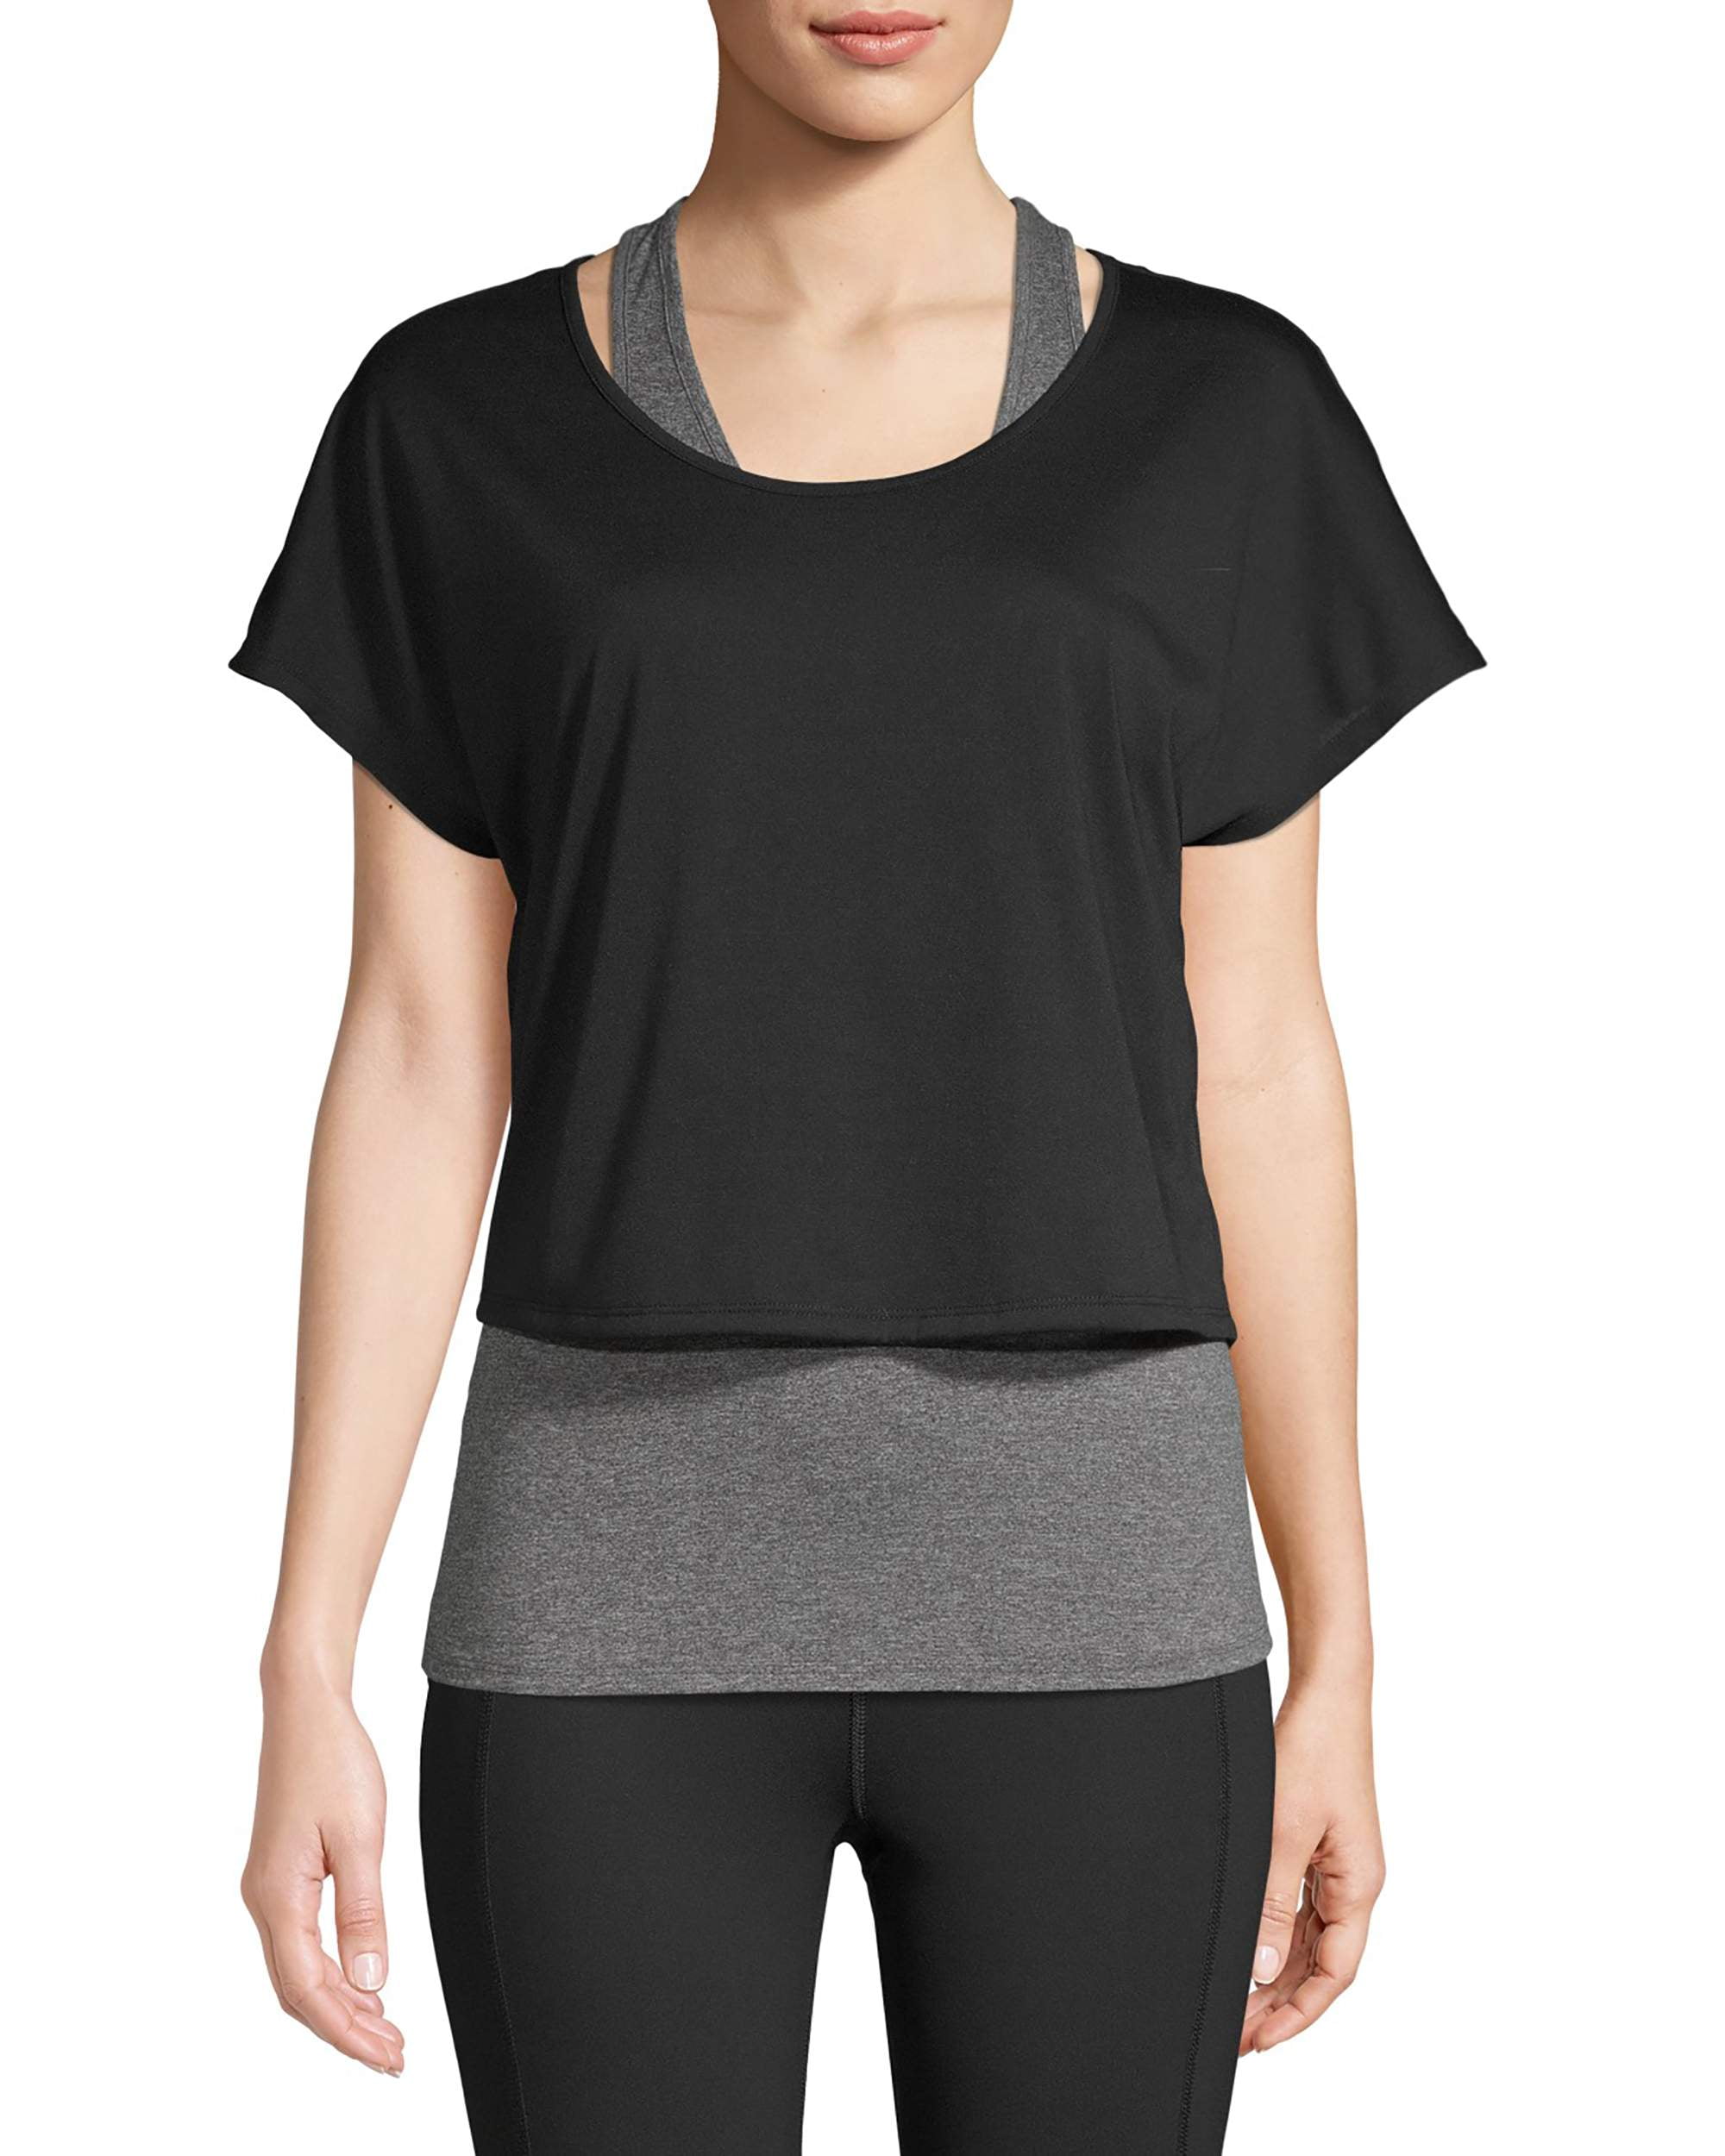 Avia Women's Active Performance Two in One T-Shirt - Walmart.com